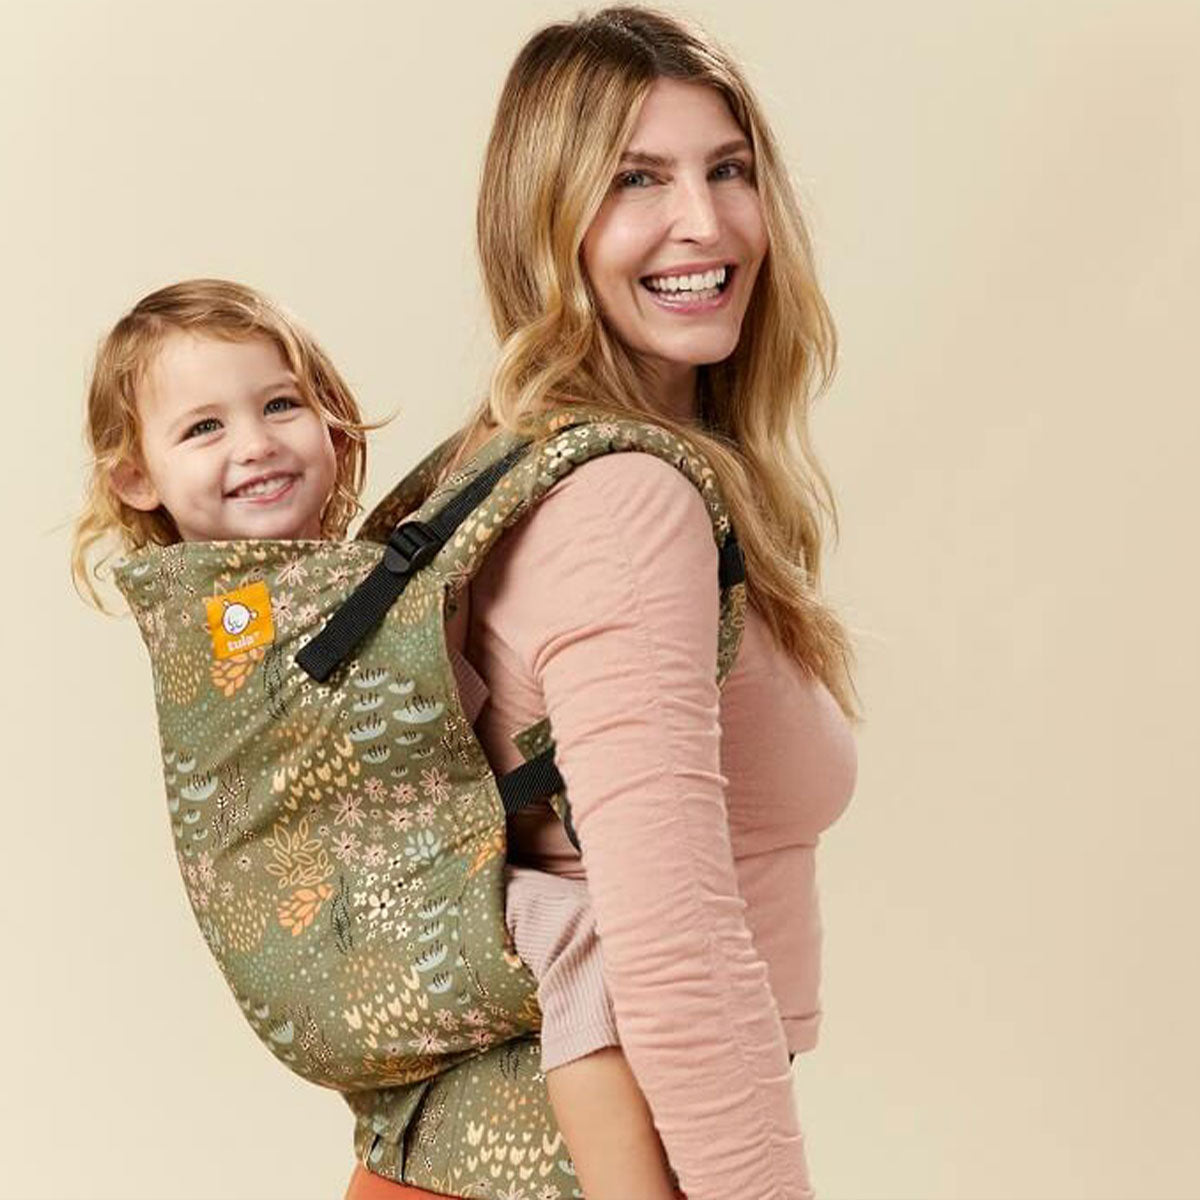 Smiling mum with her daughter sitting in a Toddler carrier on her back